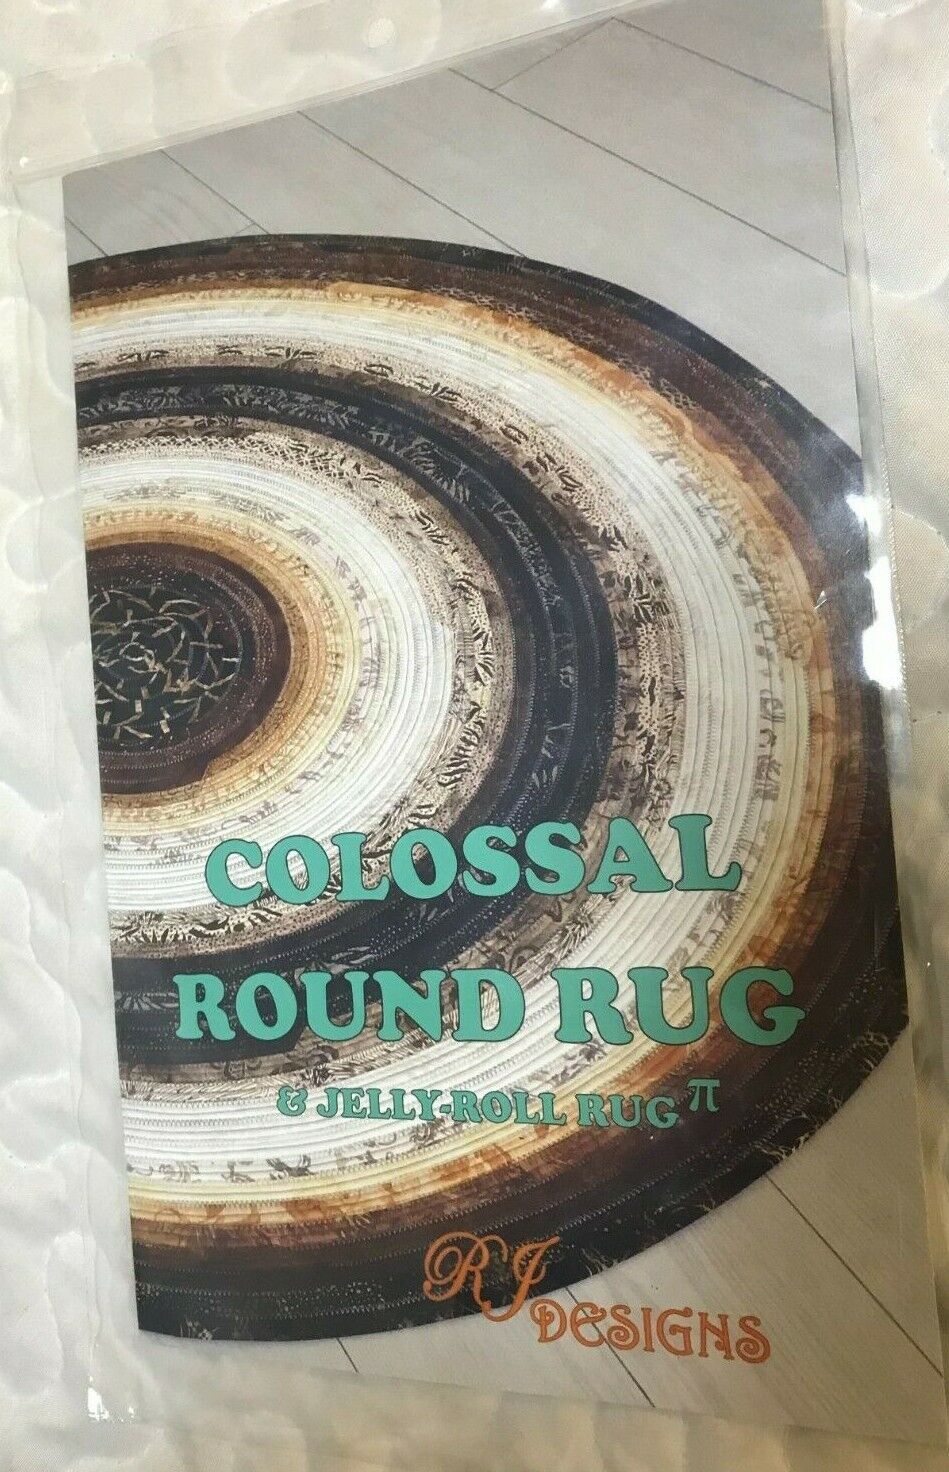 Rj Designs Colossal Round Rug & Jelly-roll Rug Pattern